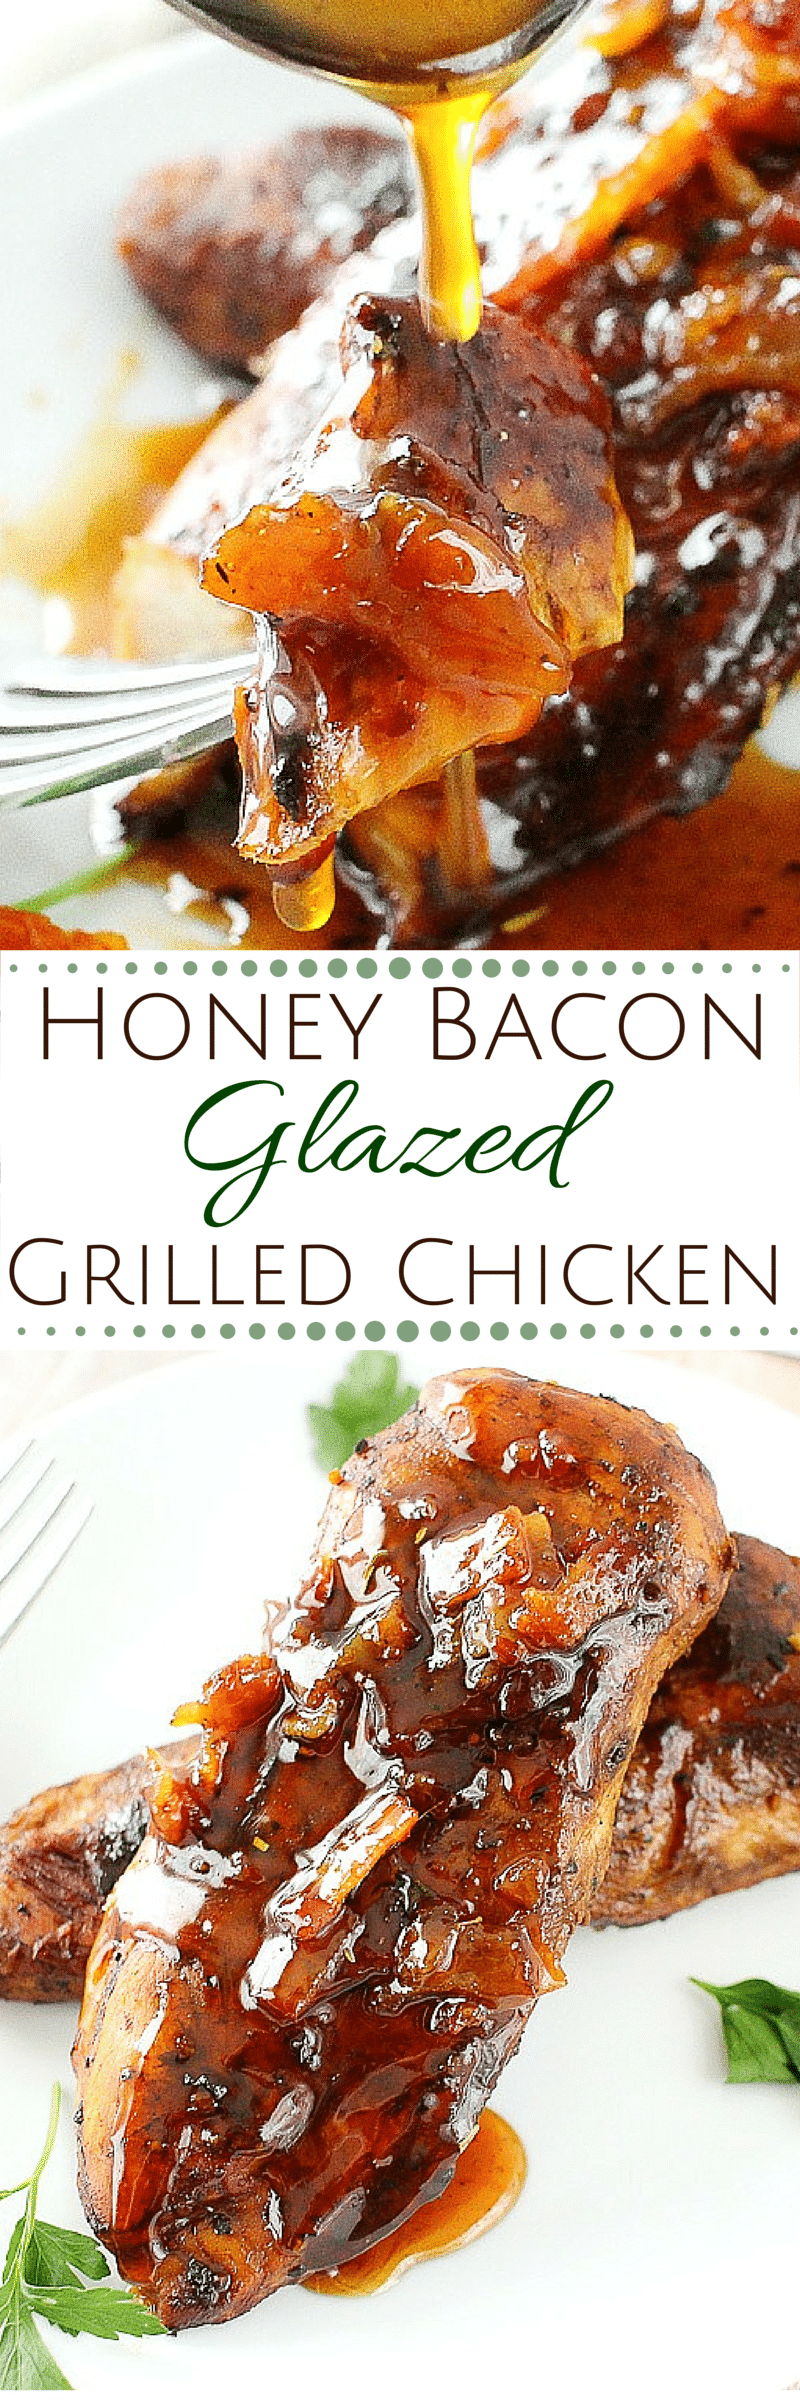 Marinated chicken, grilled to perfection and drizzled with a spicy honey bacon glaze.  This glazed chicken will be a family favorite!